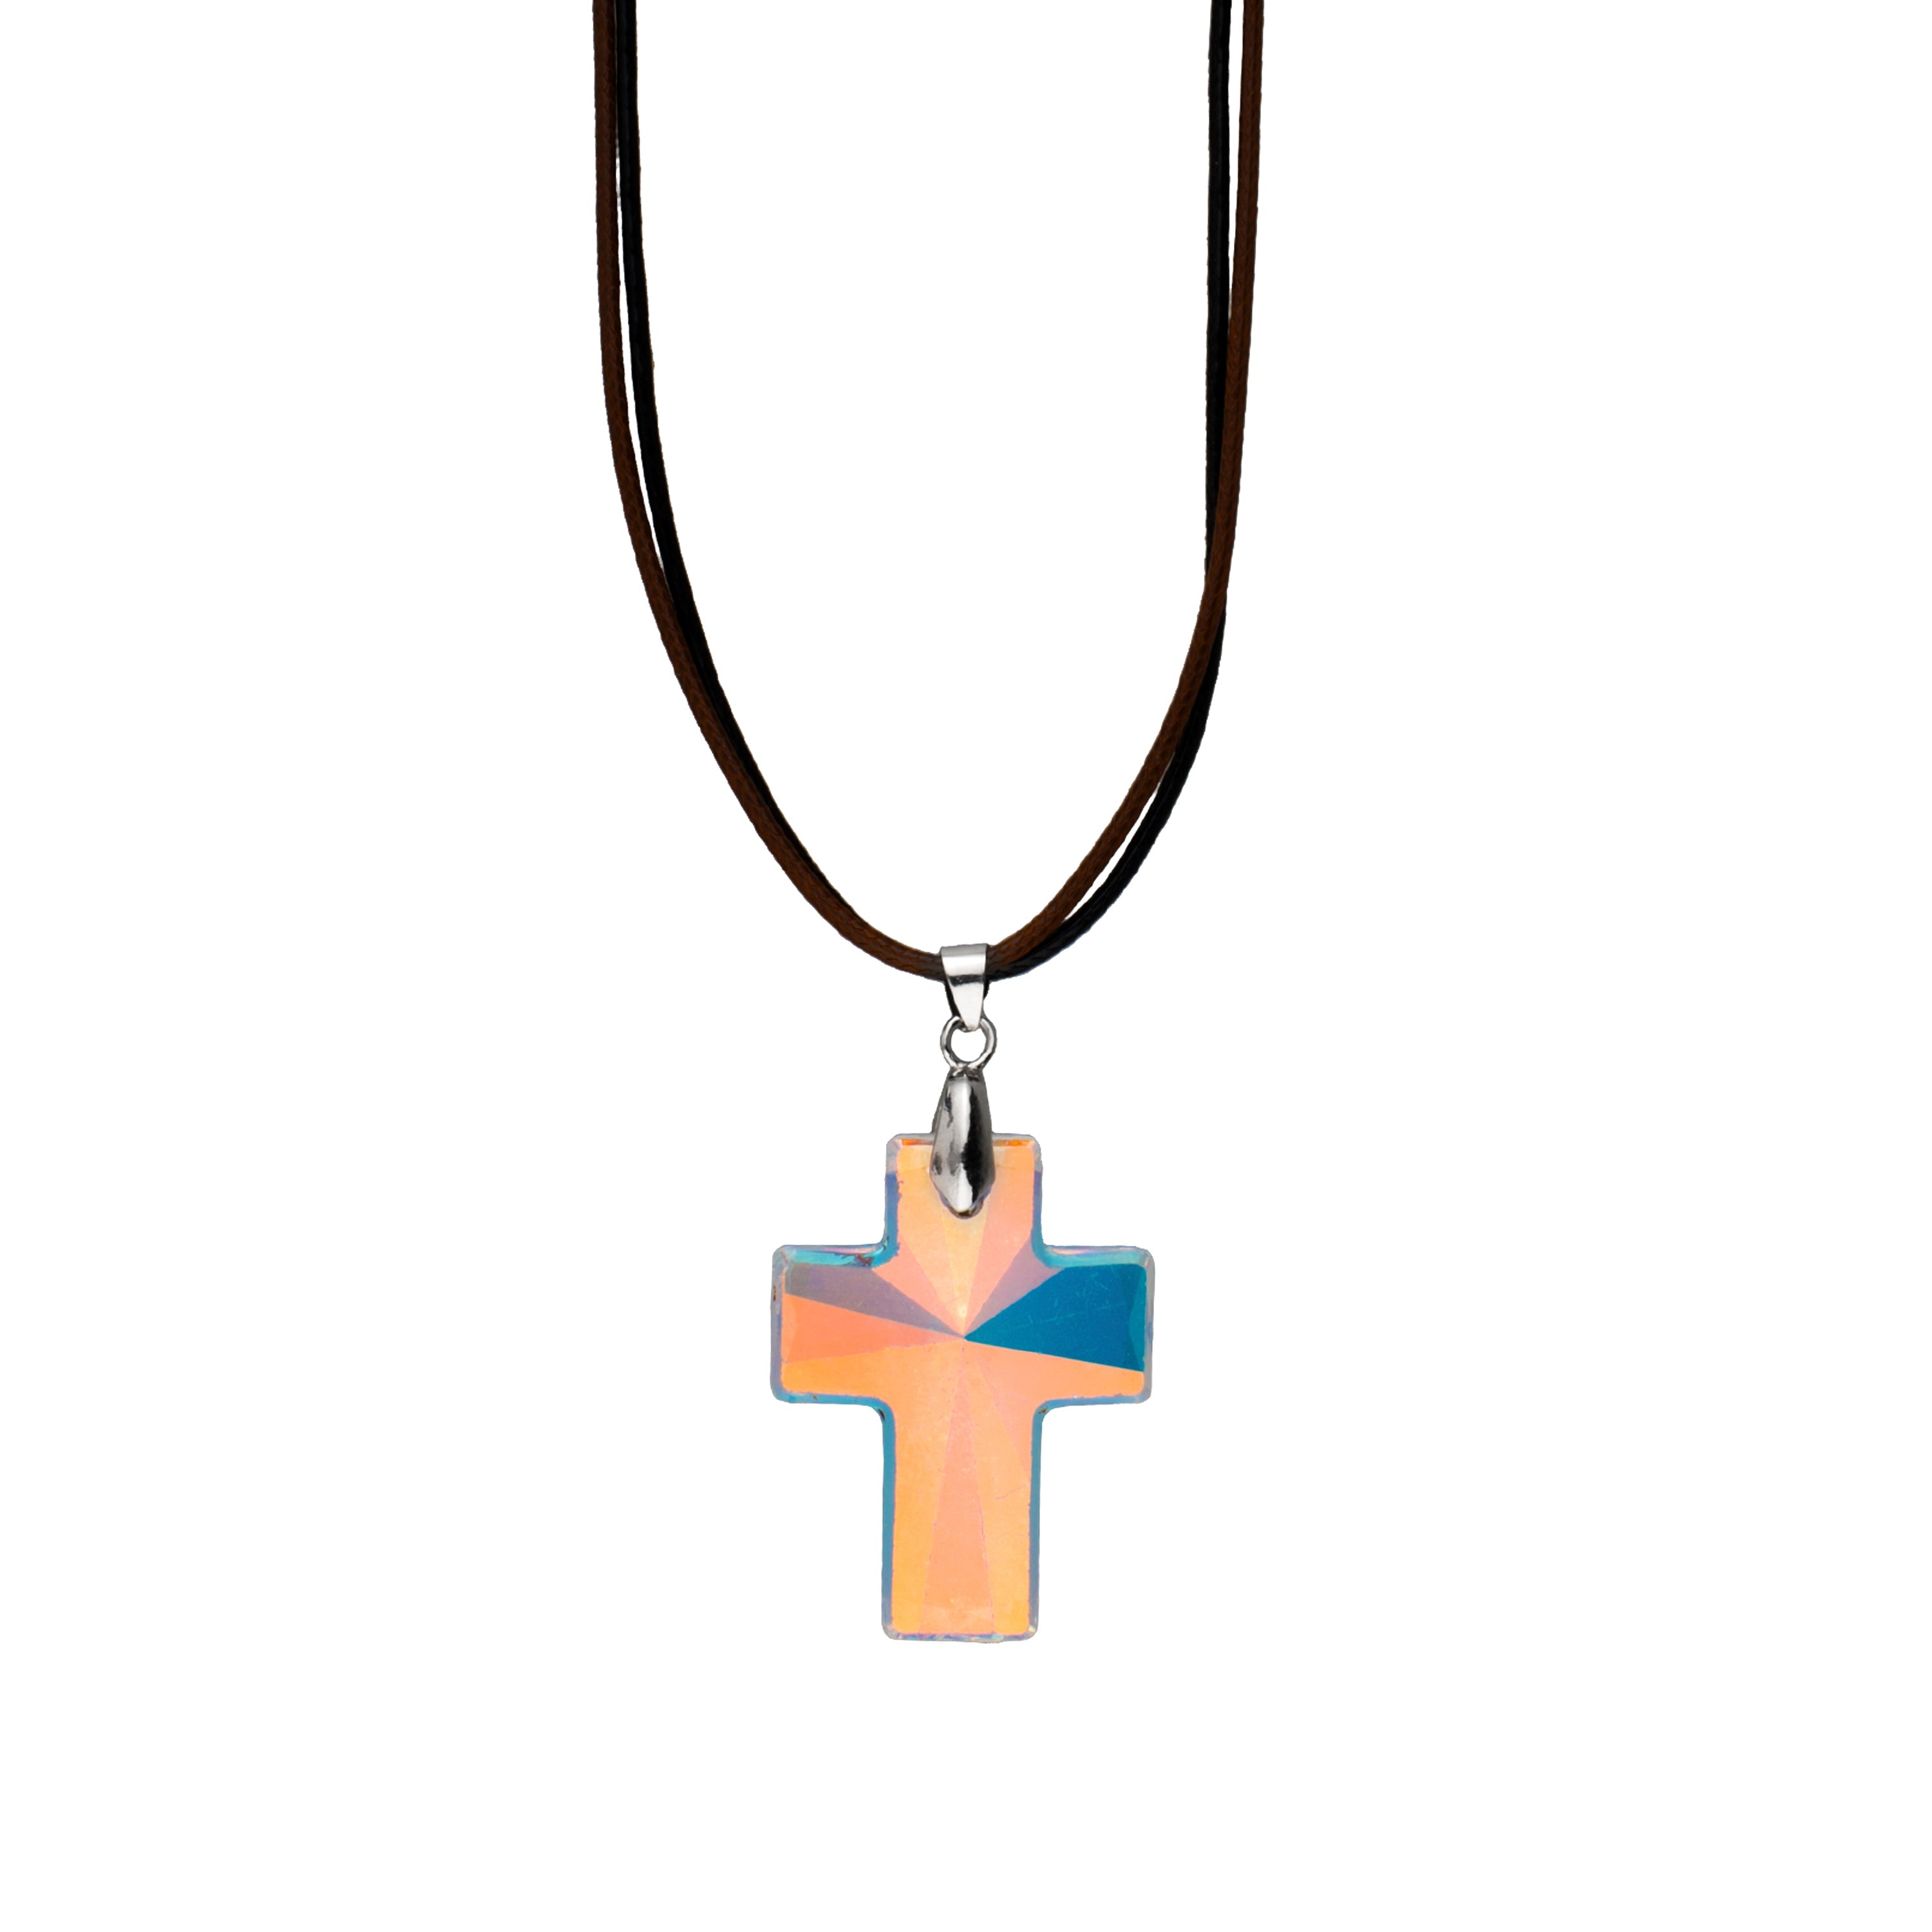 THE TEMPLAR KNIGHT Cross Necklace for Men with Black Leather Cord